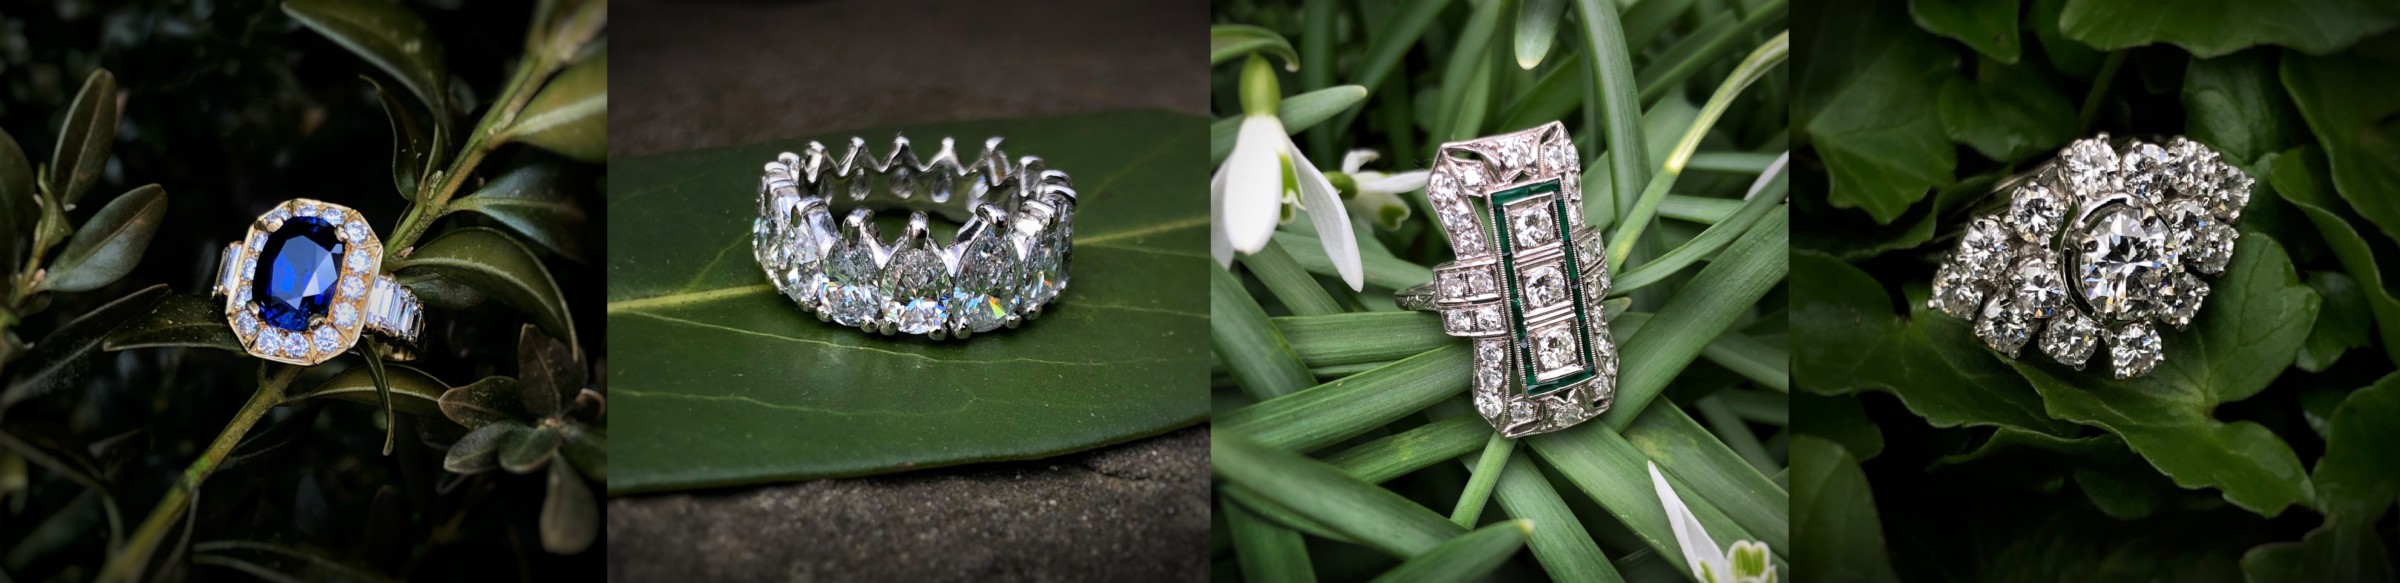 7 Standout Engagement Rings from the April 9th Auction